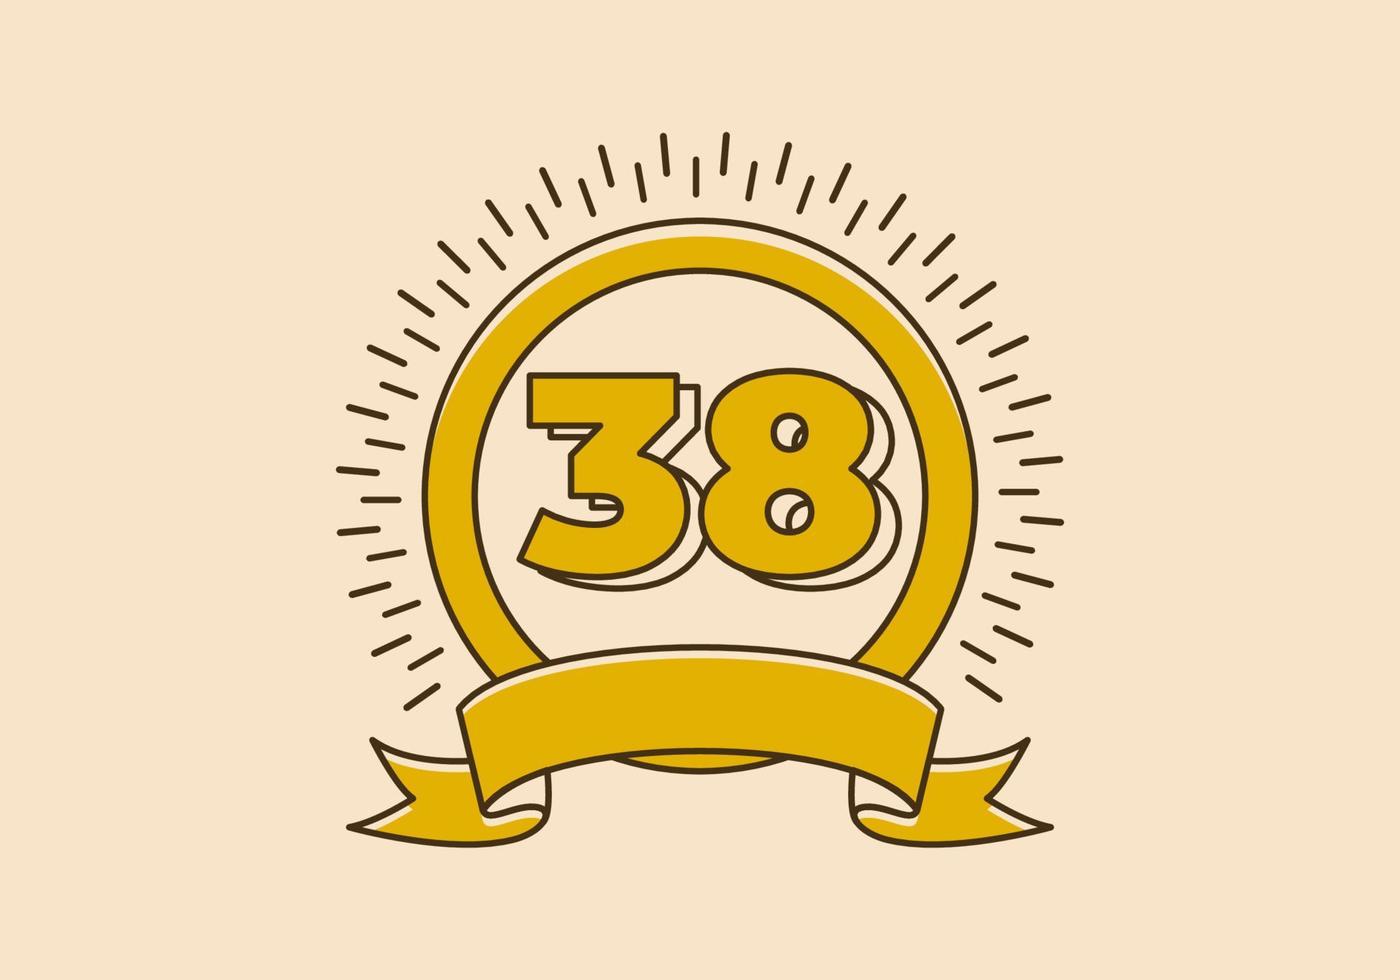 Vintage yellow circle badge with number 38 on it vector